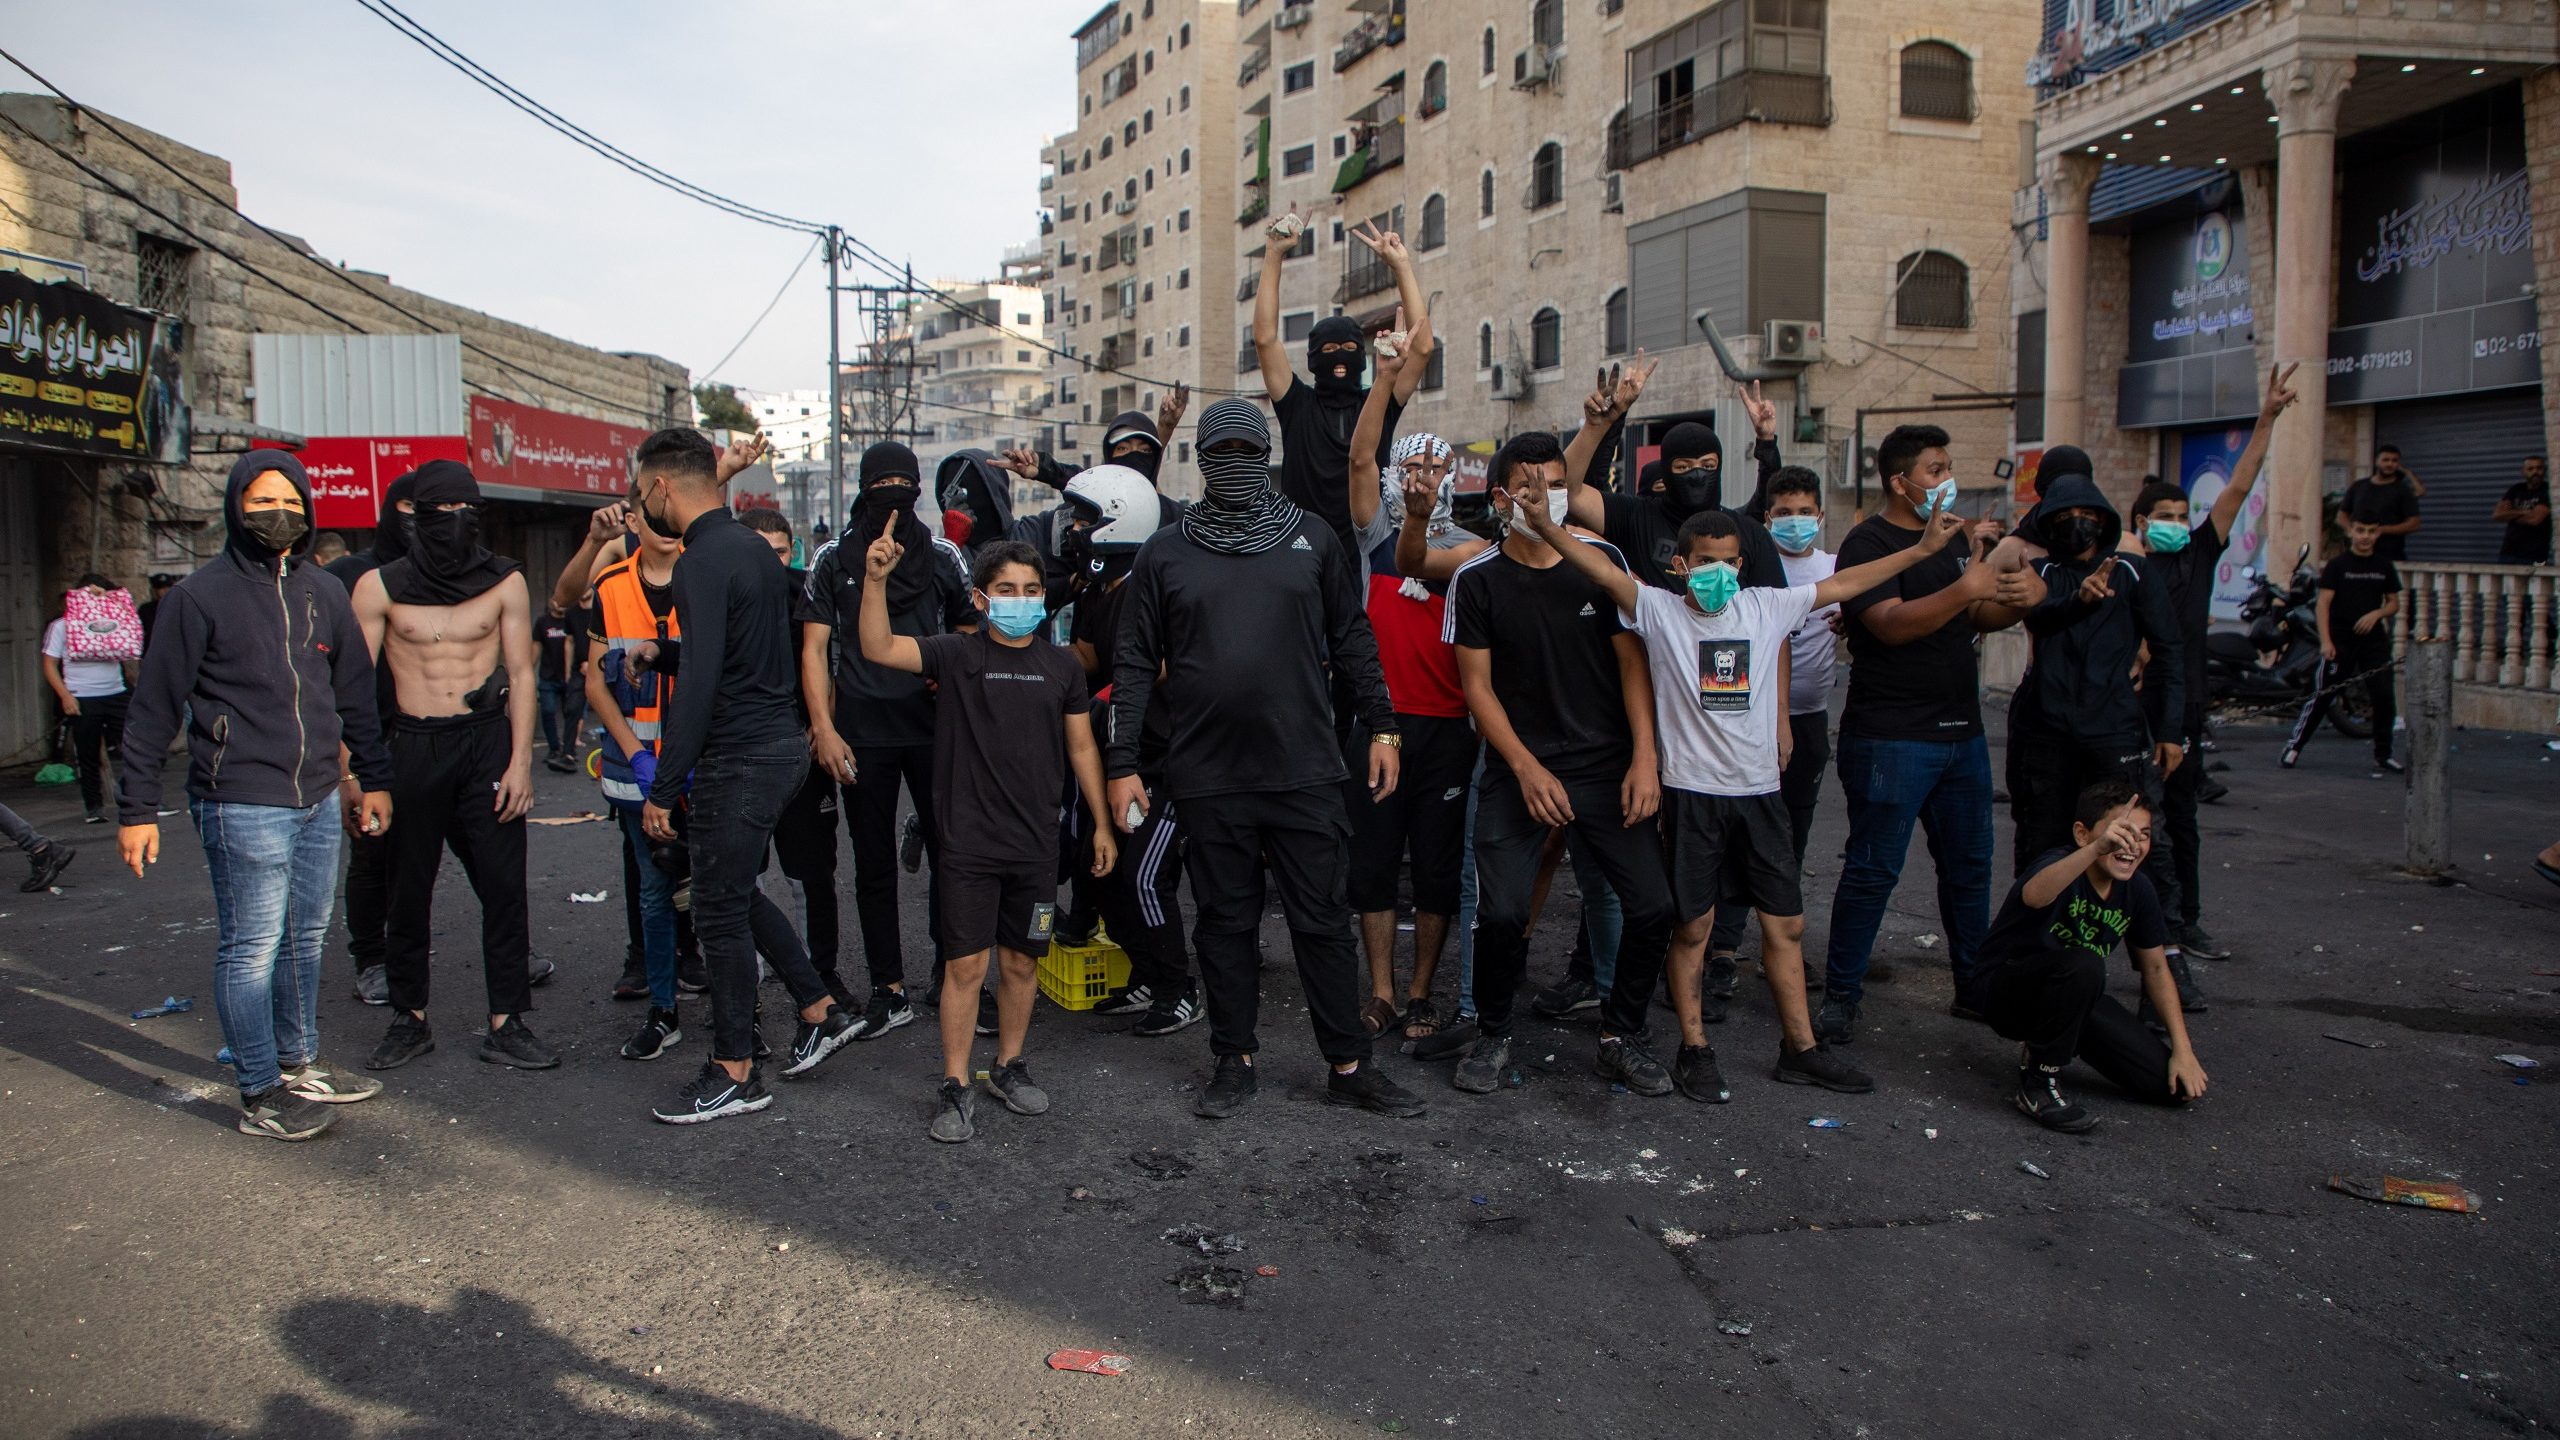 East Jerusalem Riots Quelled but Palestinian Groups Call for 'Day of